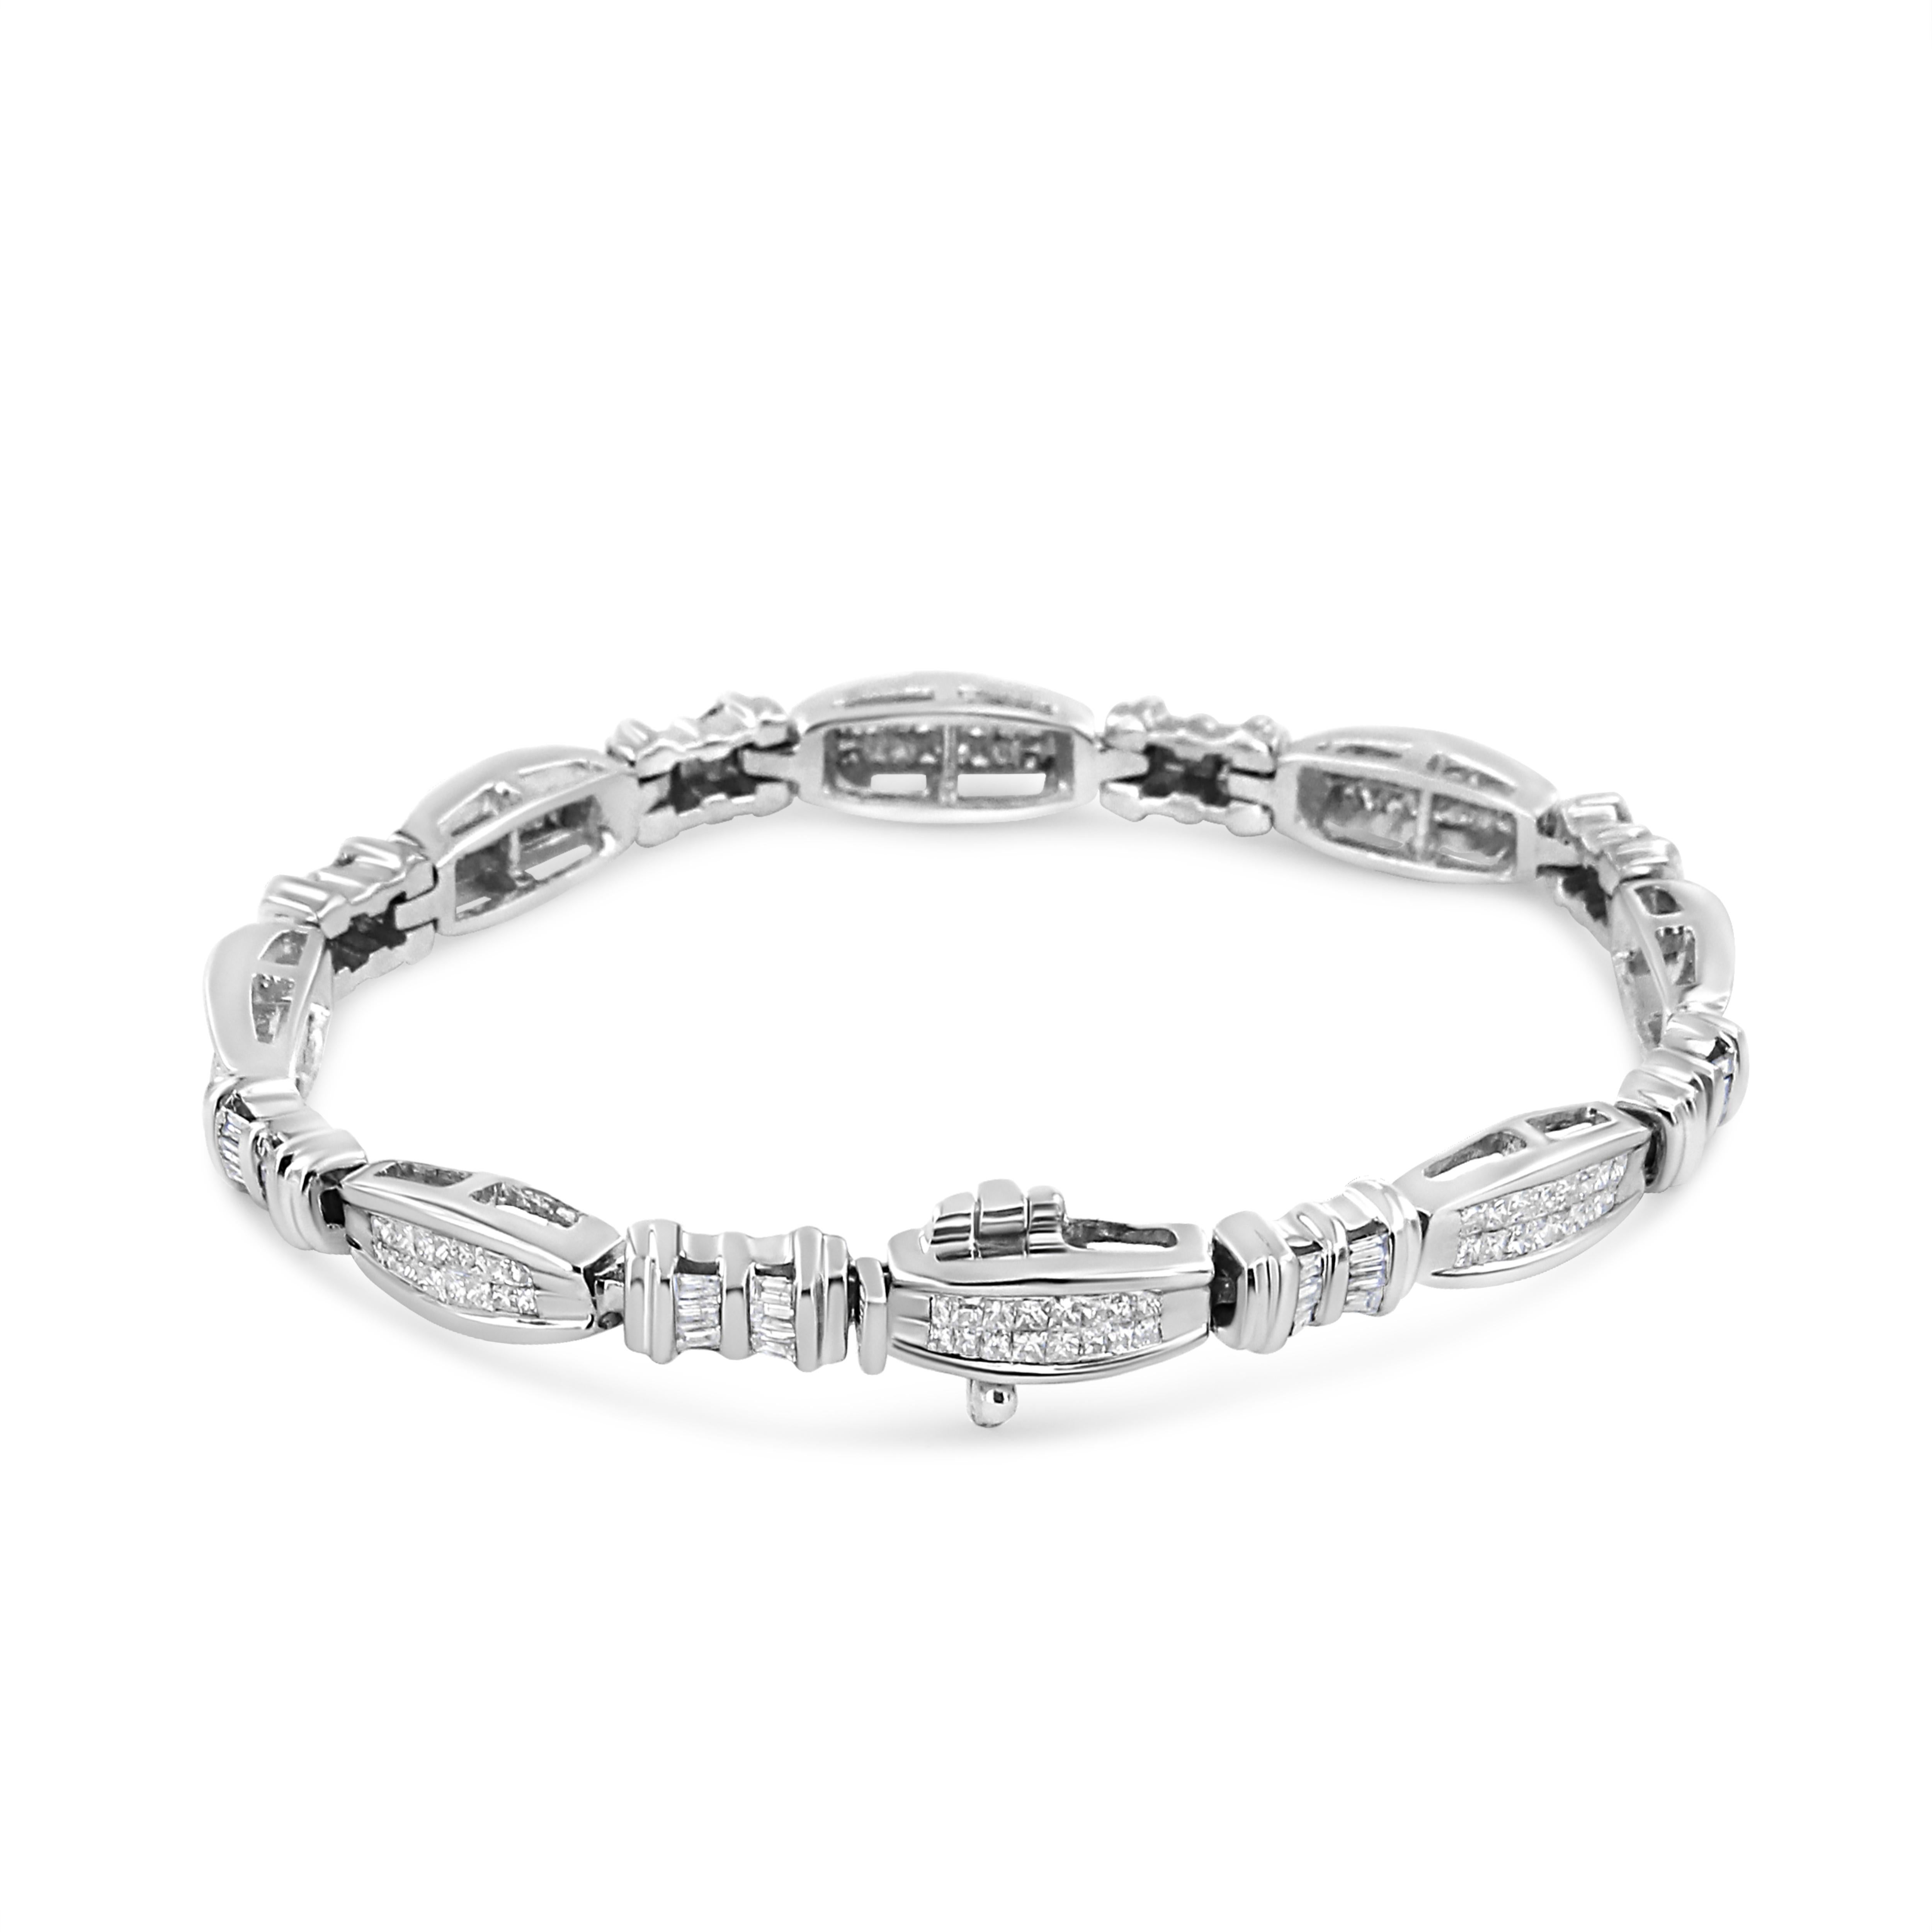 This stunning link bracelet is a great accessory. Crafted in 14k white gold, this design features channel set, princess cut diamonds set in rectangular frames. Shimmering baguette cut diamonds inlay smaller geometric pieces with vertical rows